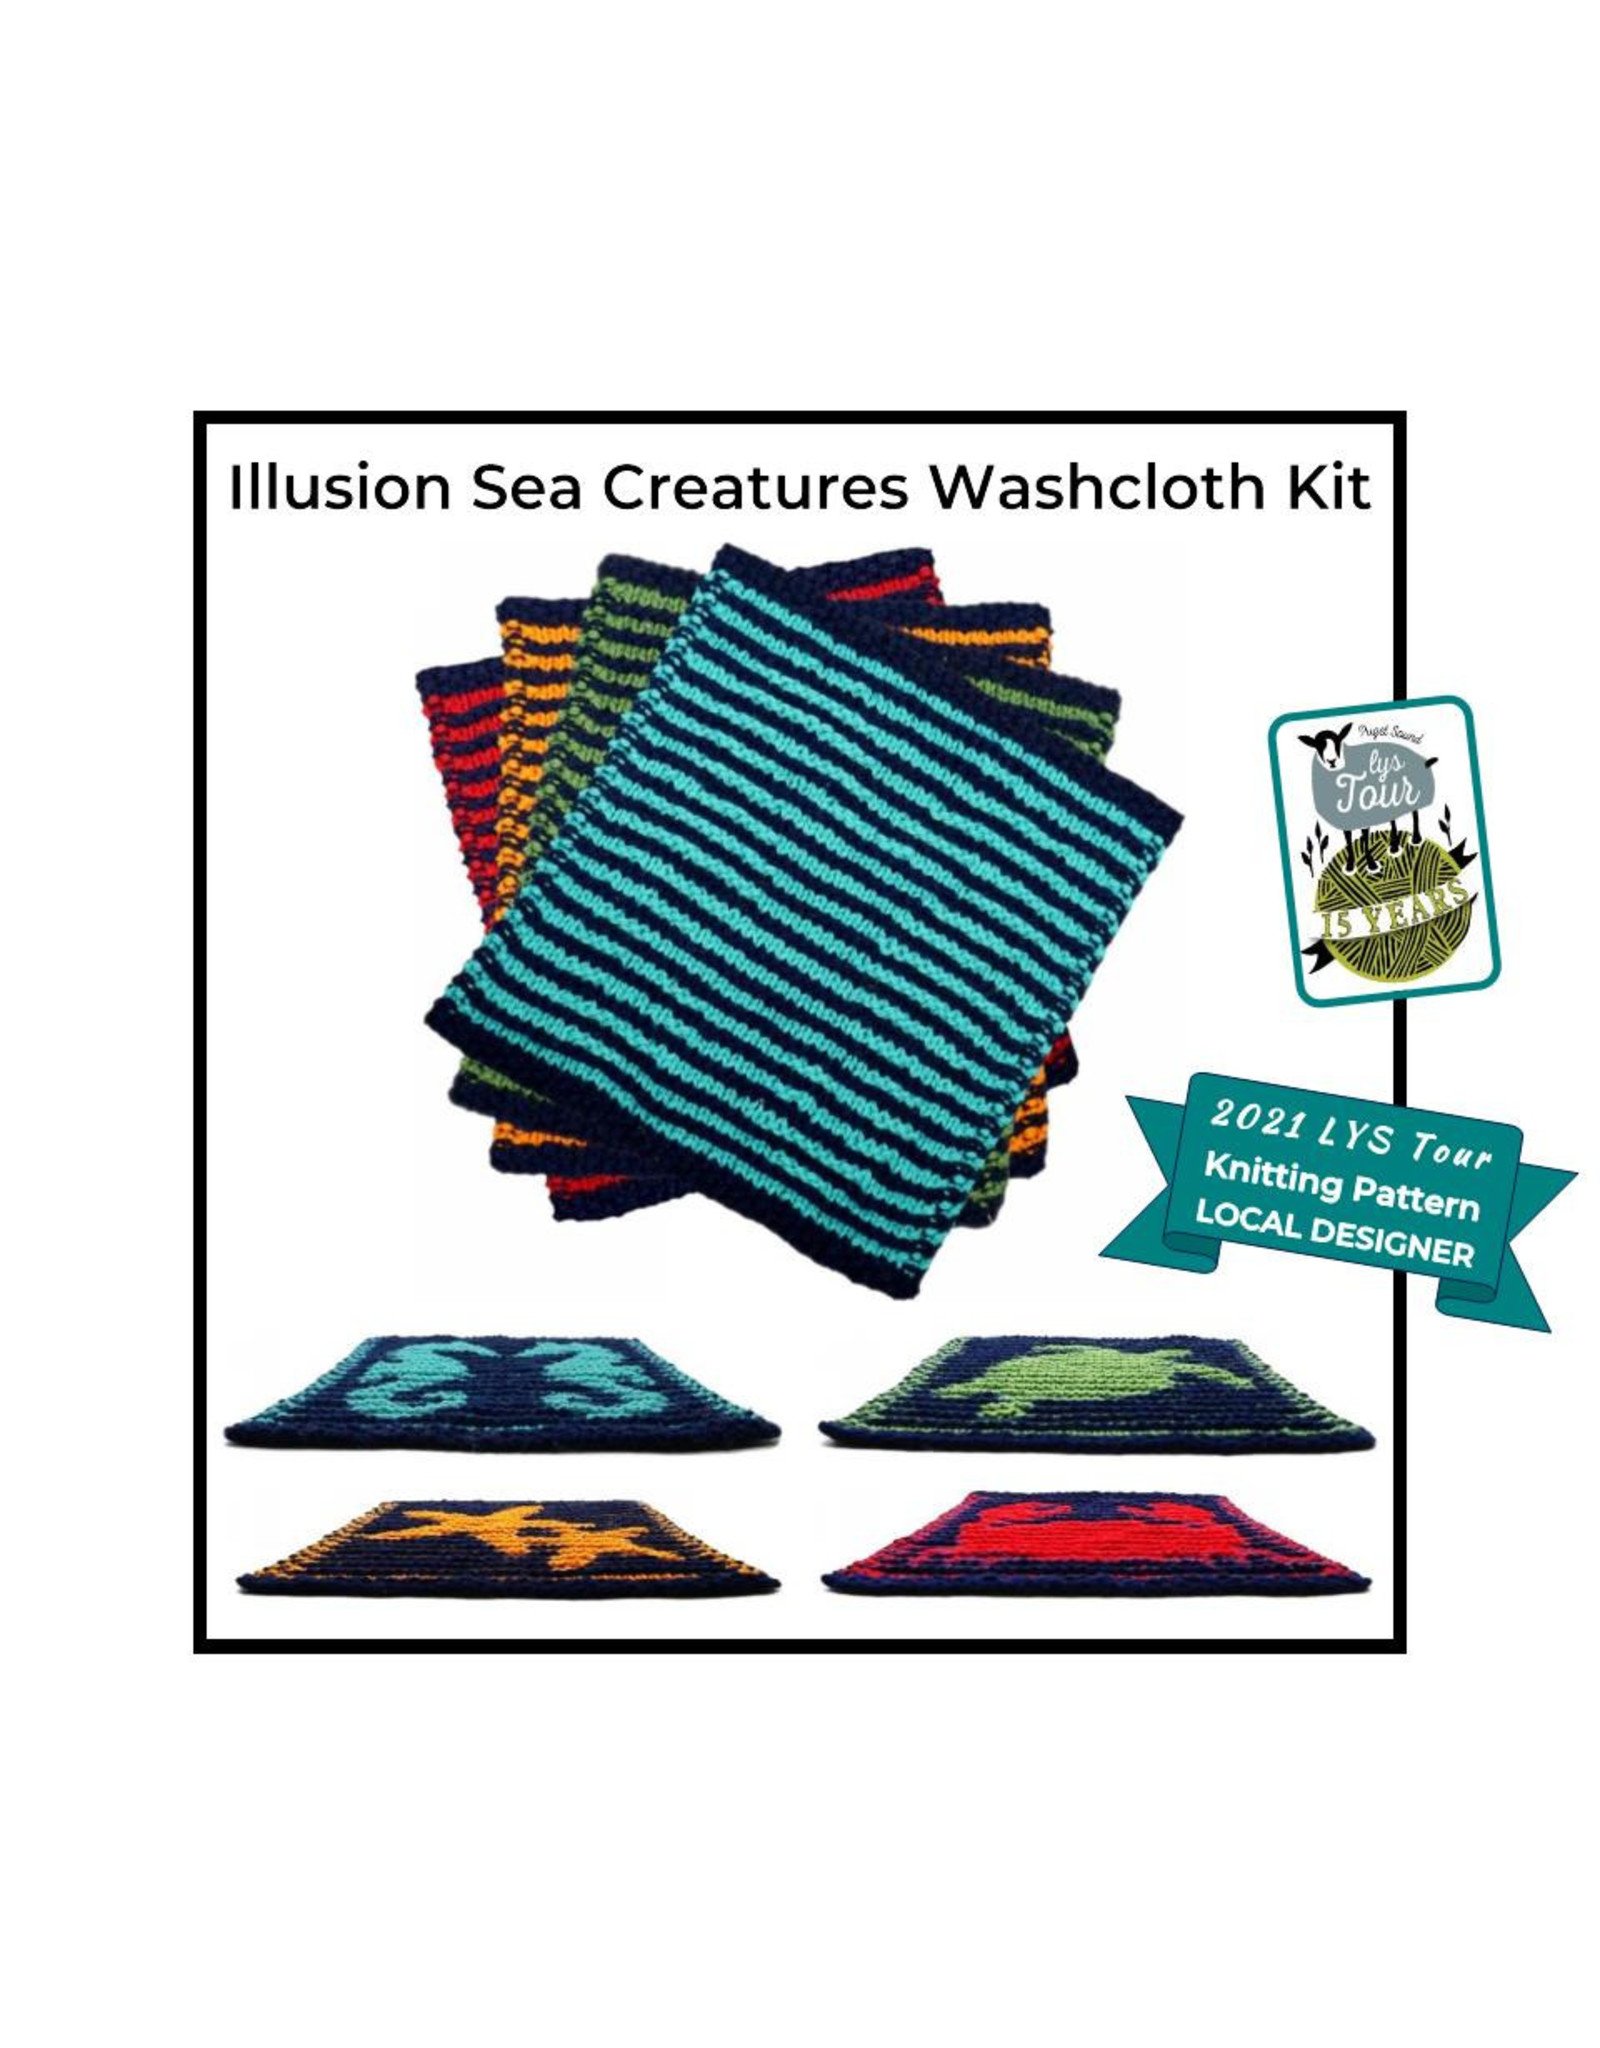 Stranded by the Sea 2021 LYS Tour - Illusion Sea Creatures Kit - Set of 4